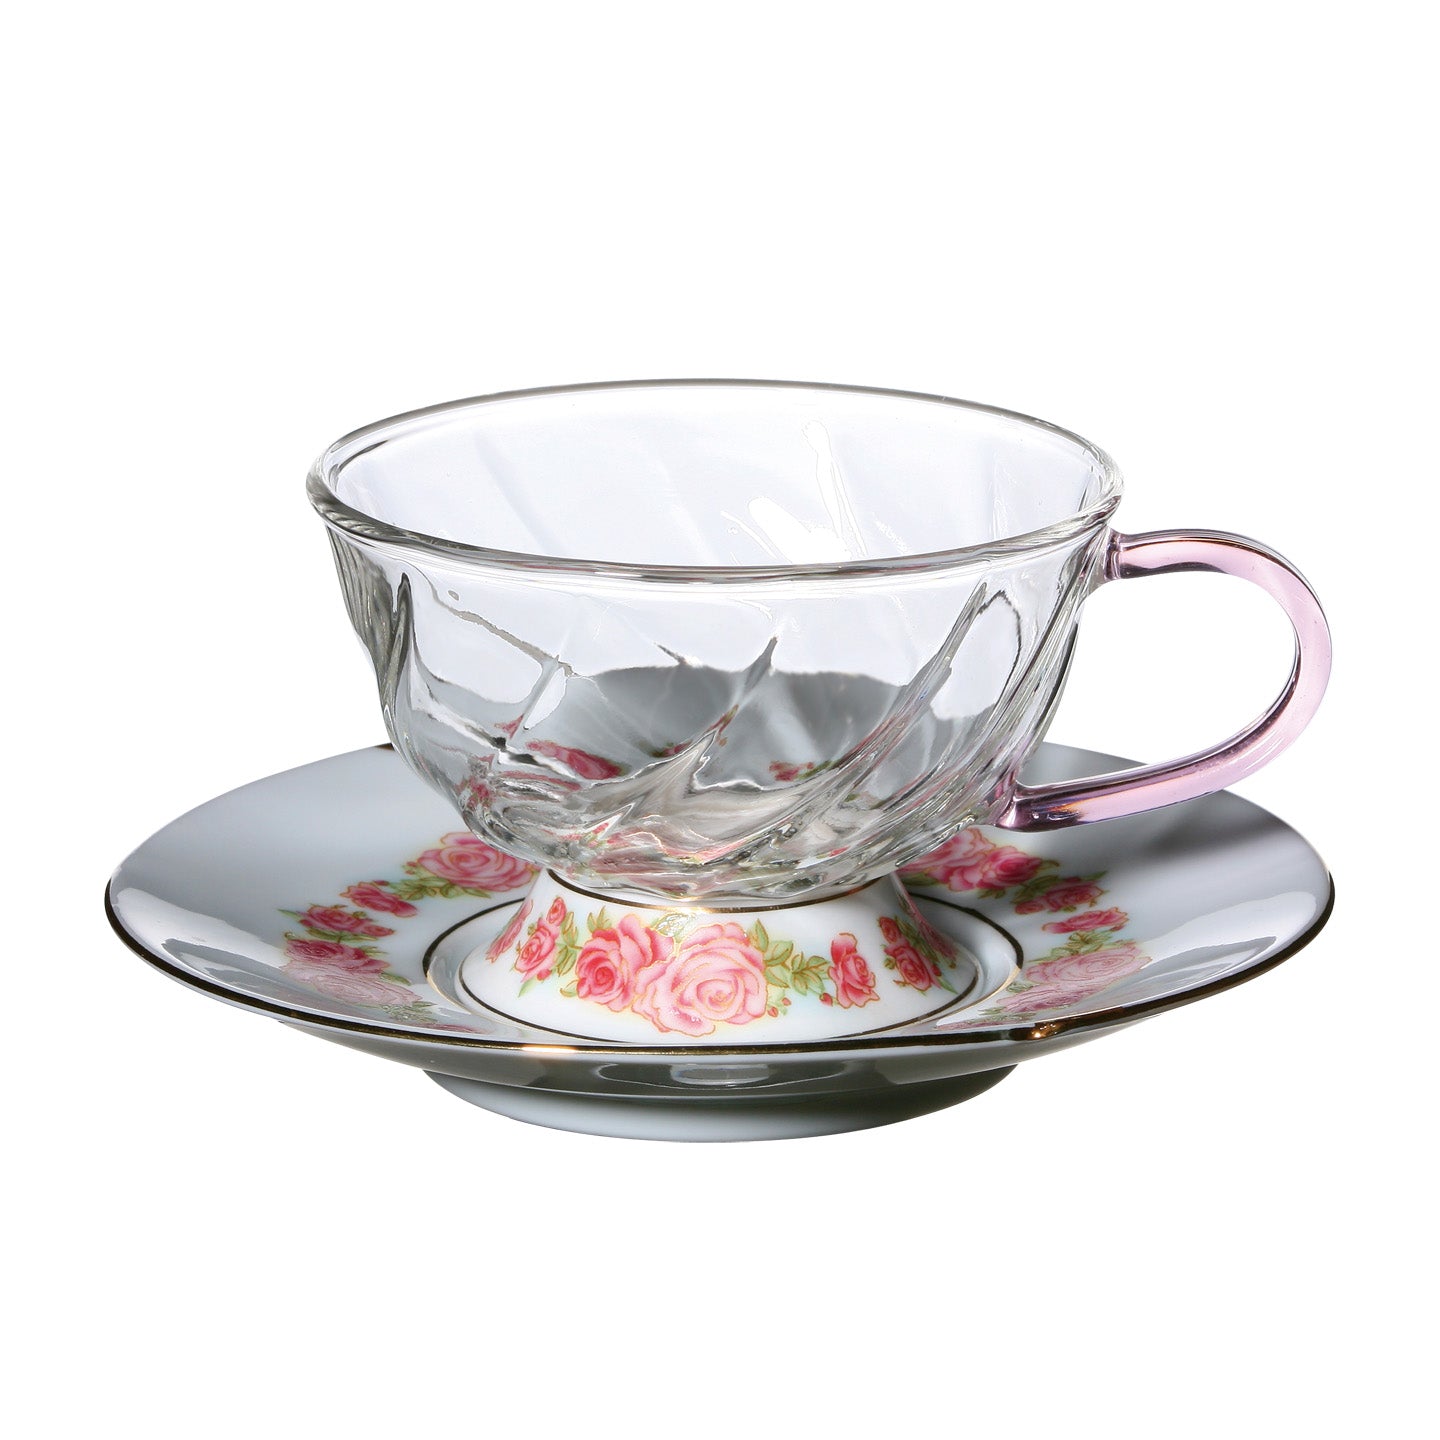 Set 4 Crystal Tea Cups with Saucer Heart Pearl Pink 180ml